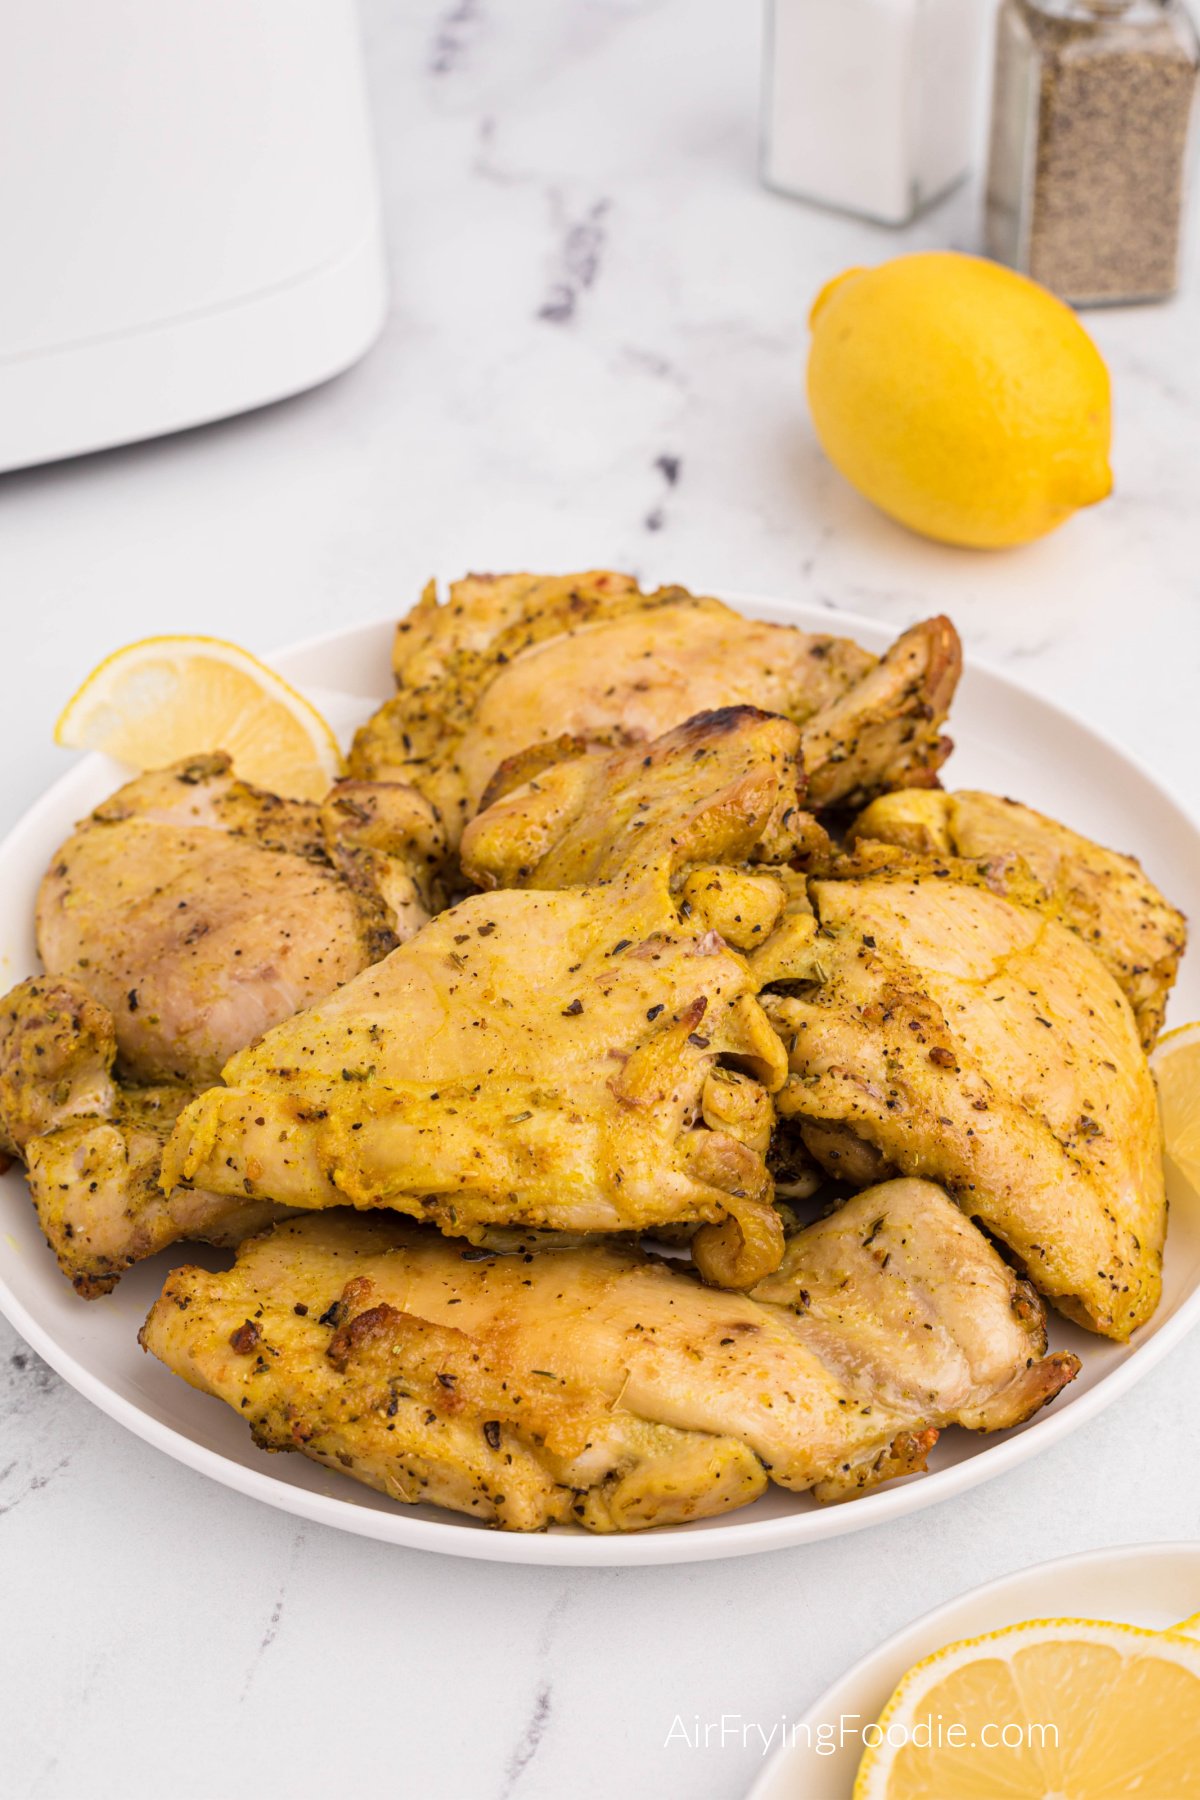 Plate full of lemon pepper chicken thighs made in the air fryer, served on a white plate with lemon wedges.